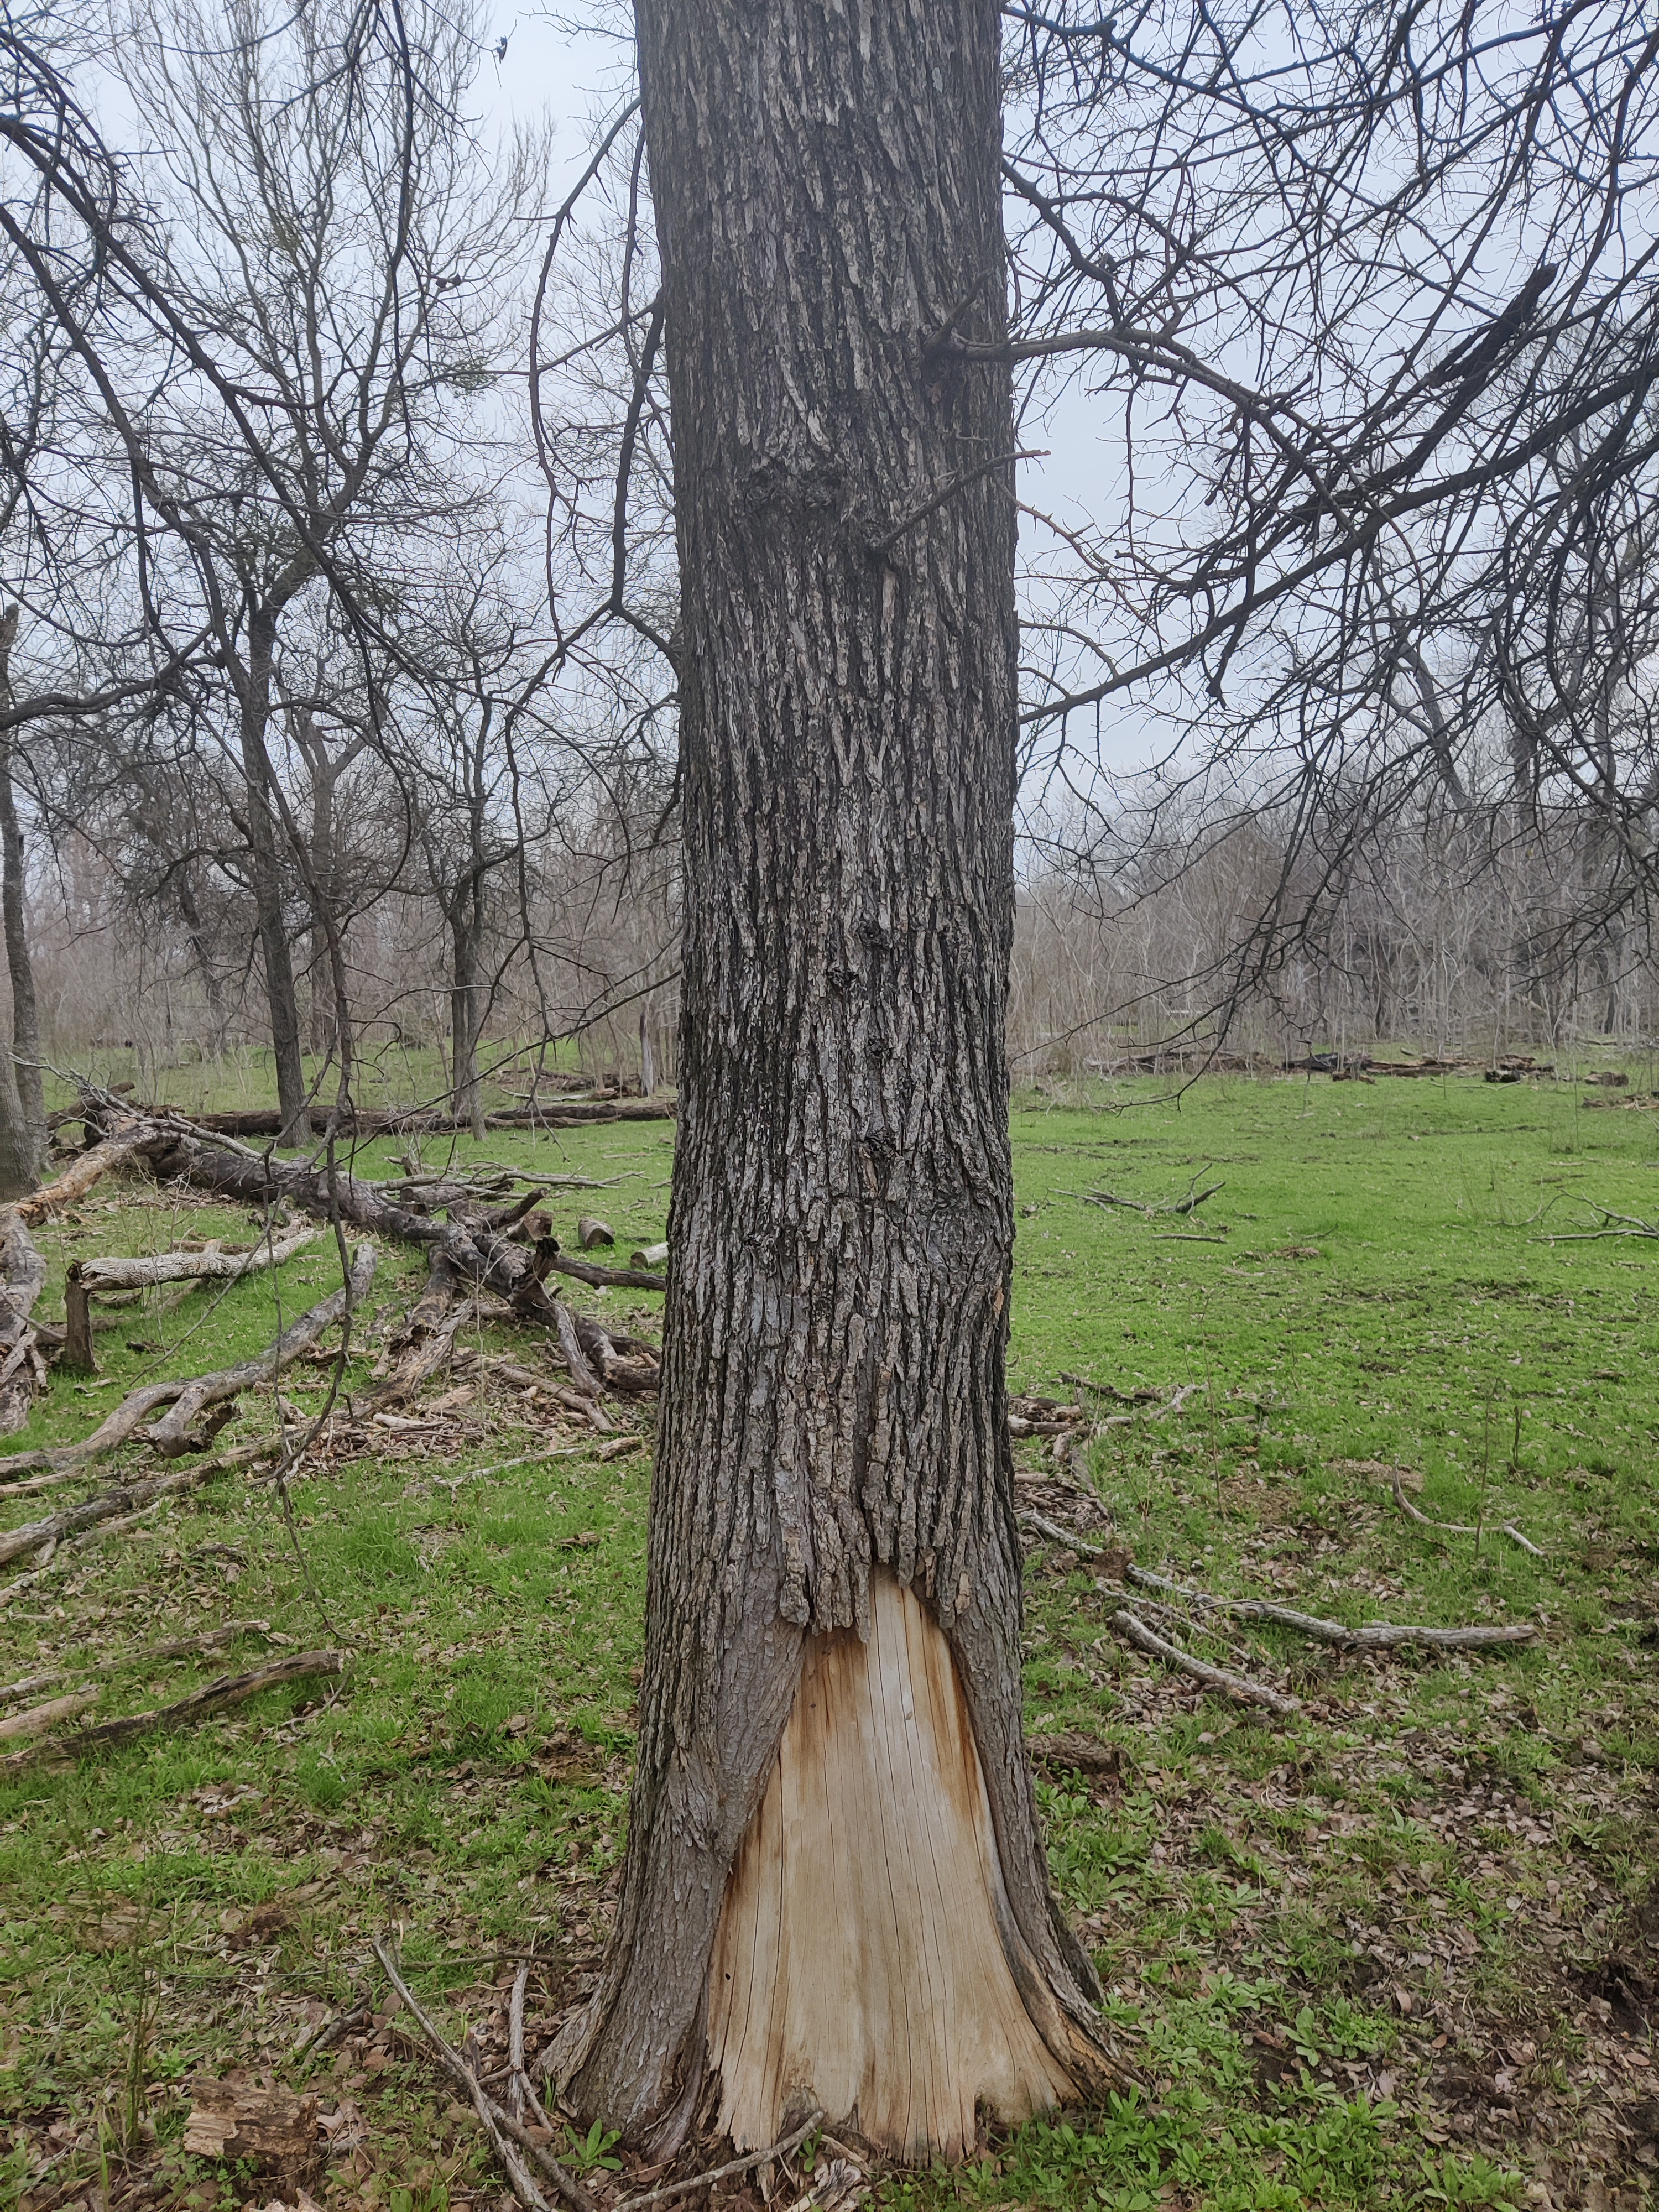 This is Cedar Elm right? Maybe ash?